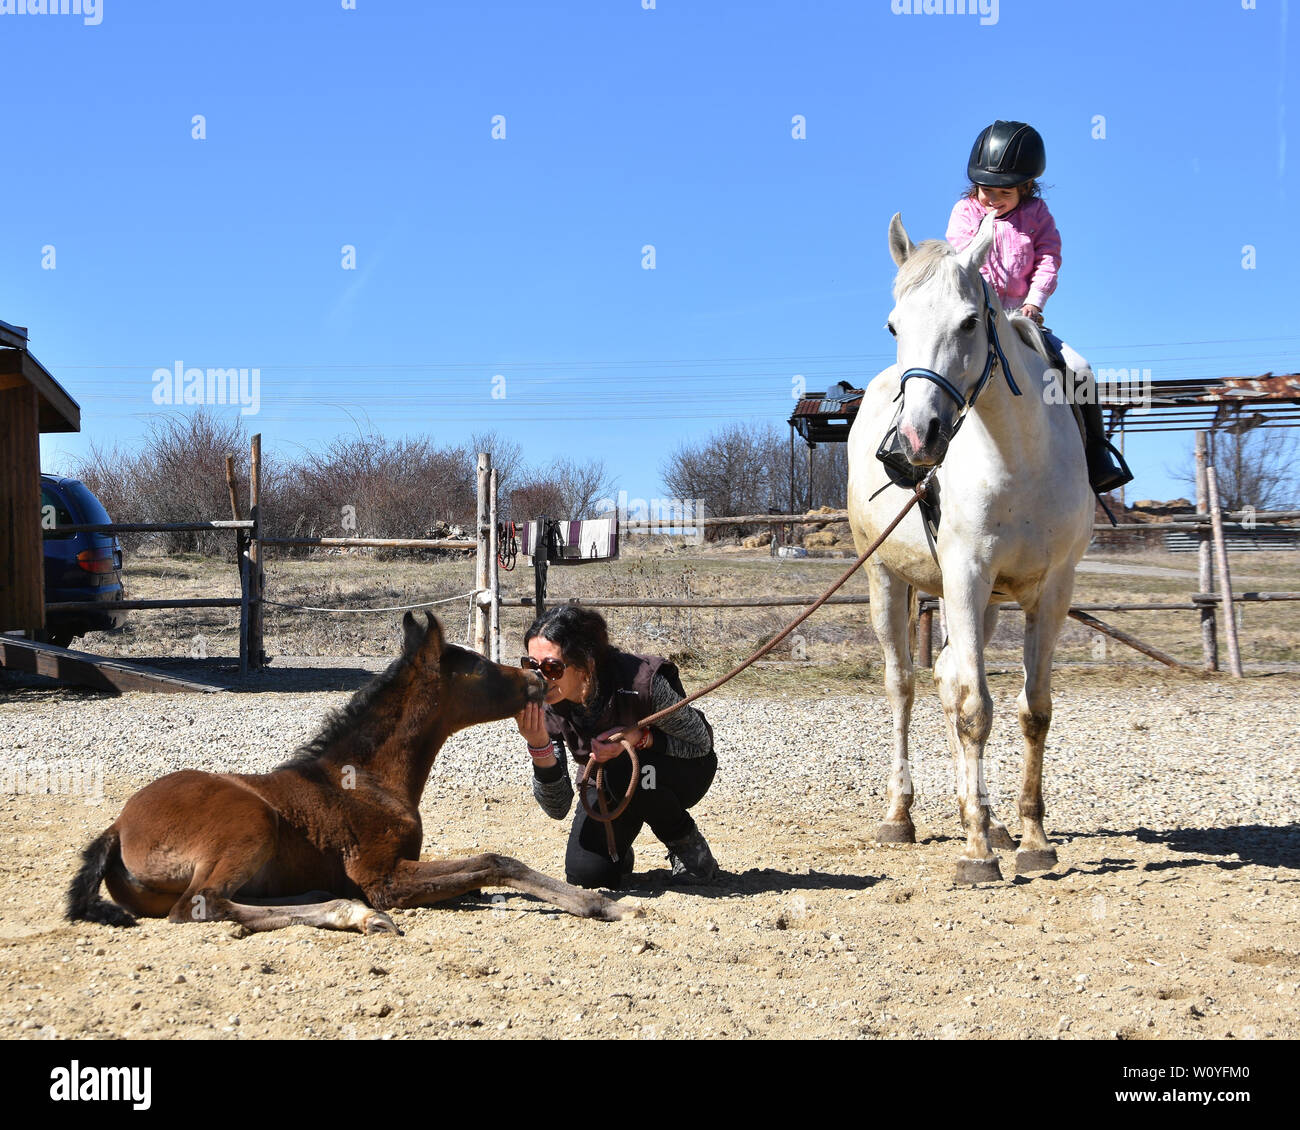 Little girl with helmet and high boots on a white mare horseback watching her mum caressing the mare’s little brown foal Stock Photo